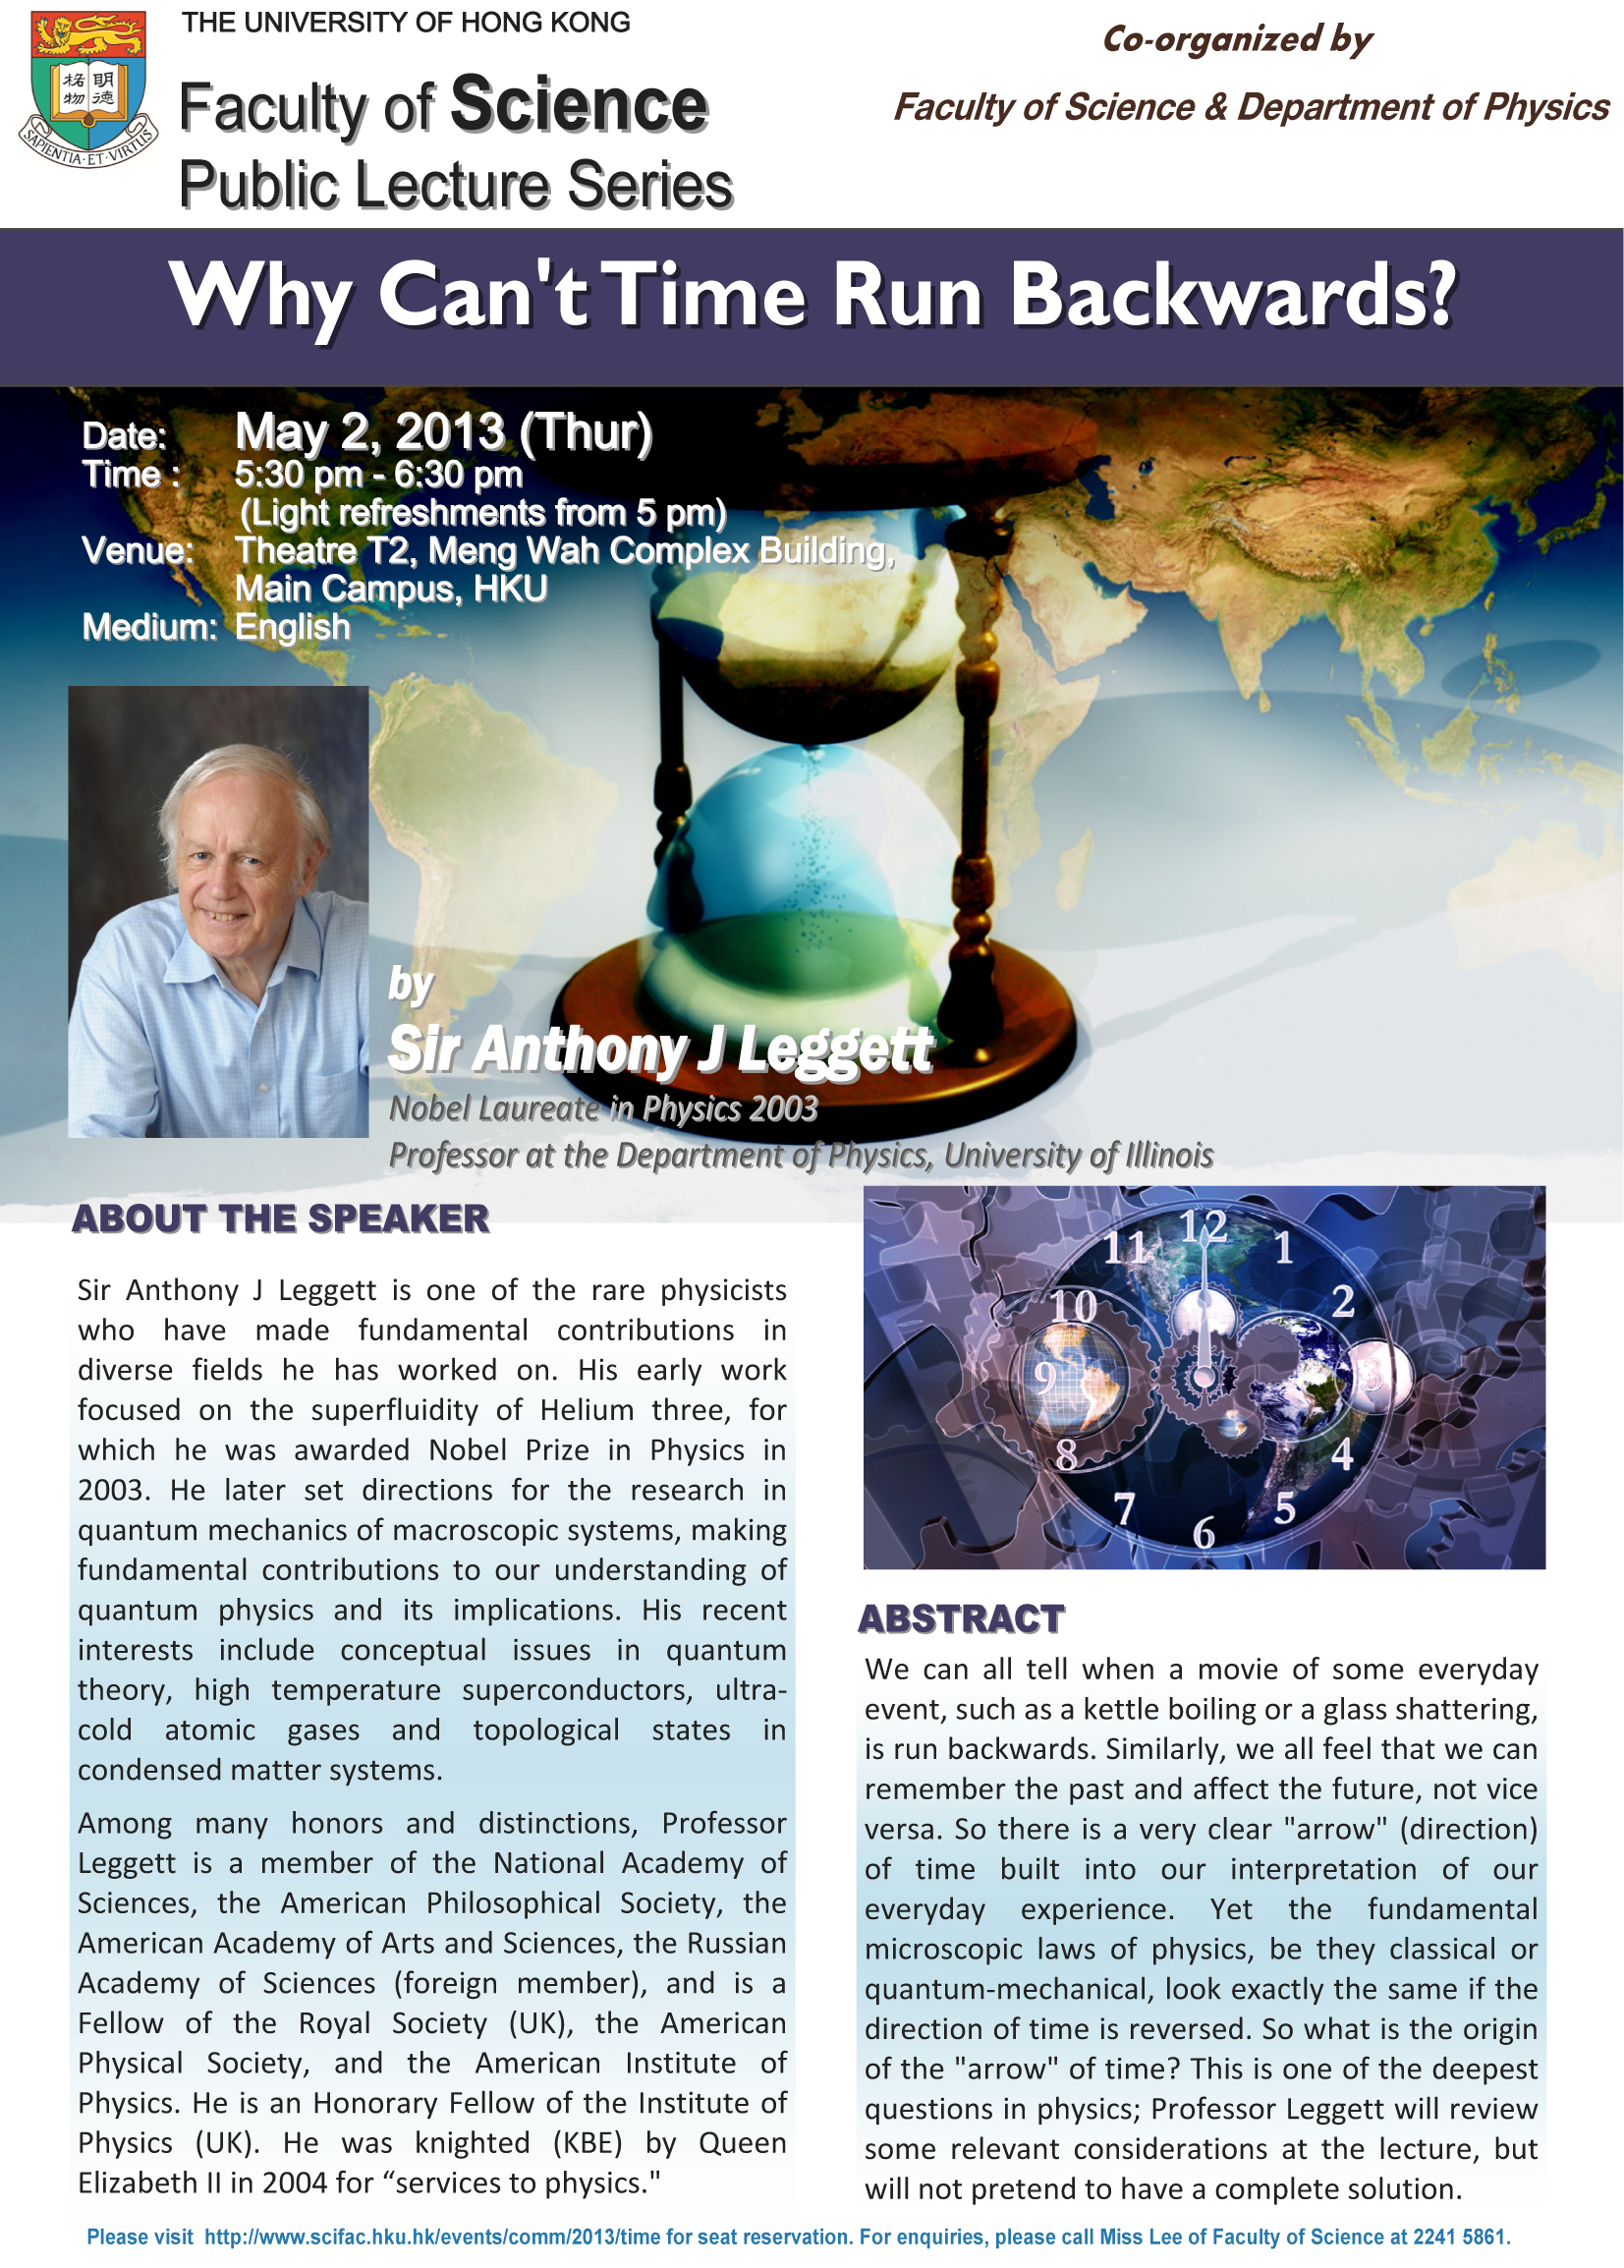 Public Lecture co-organized by Faculty of Science and Department of Physics 